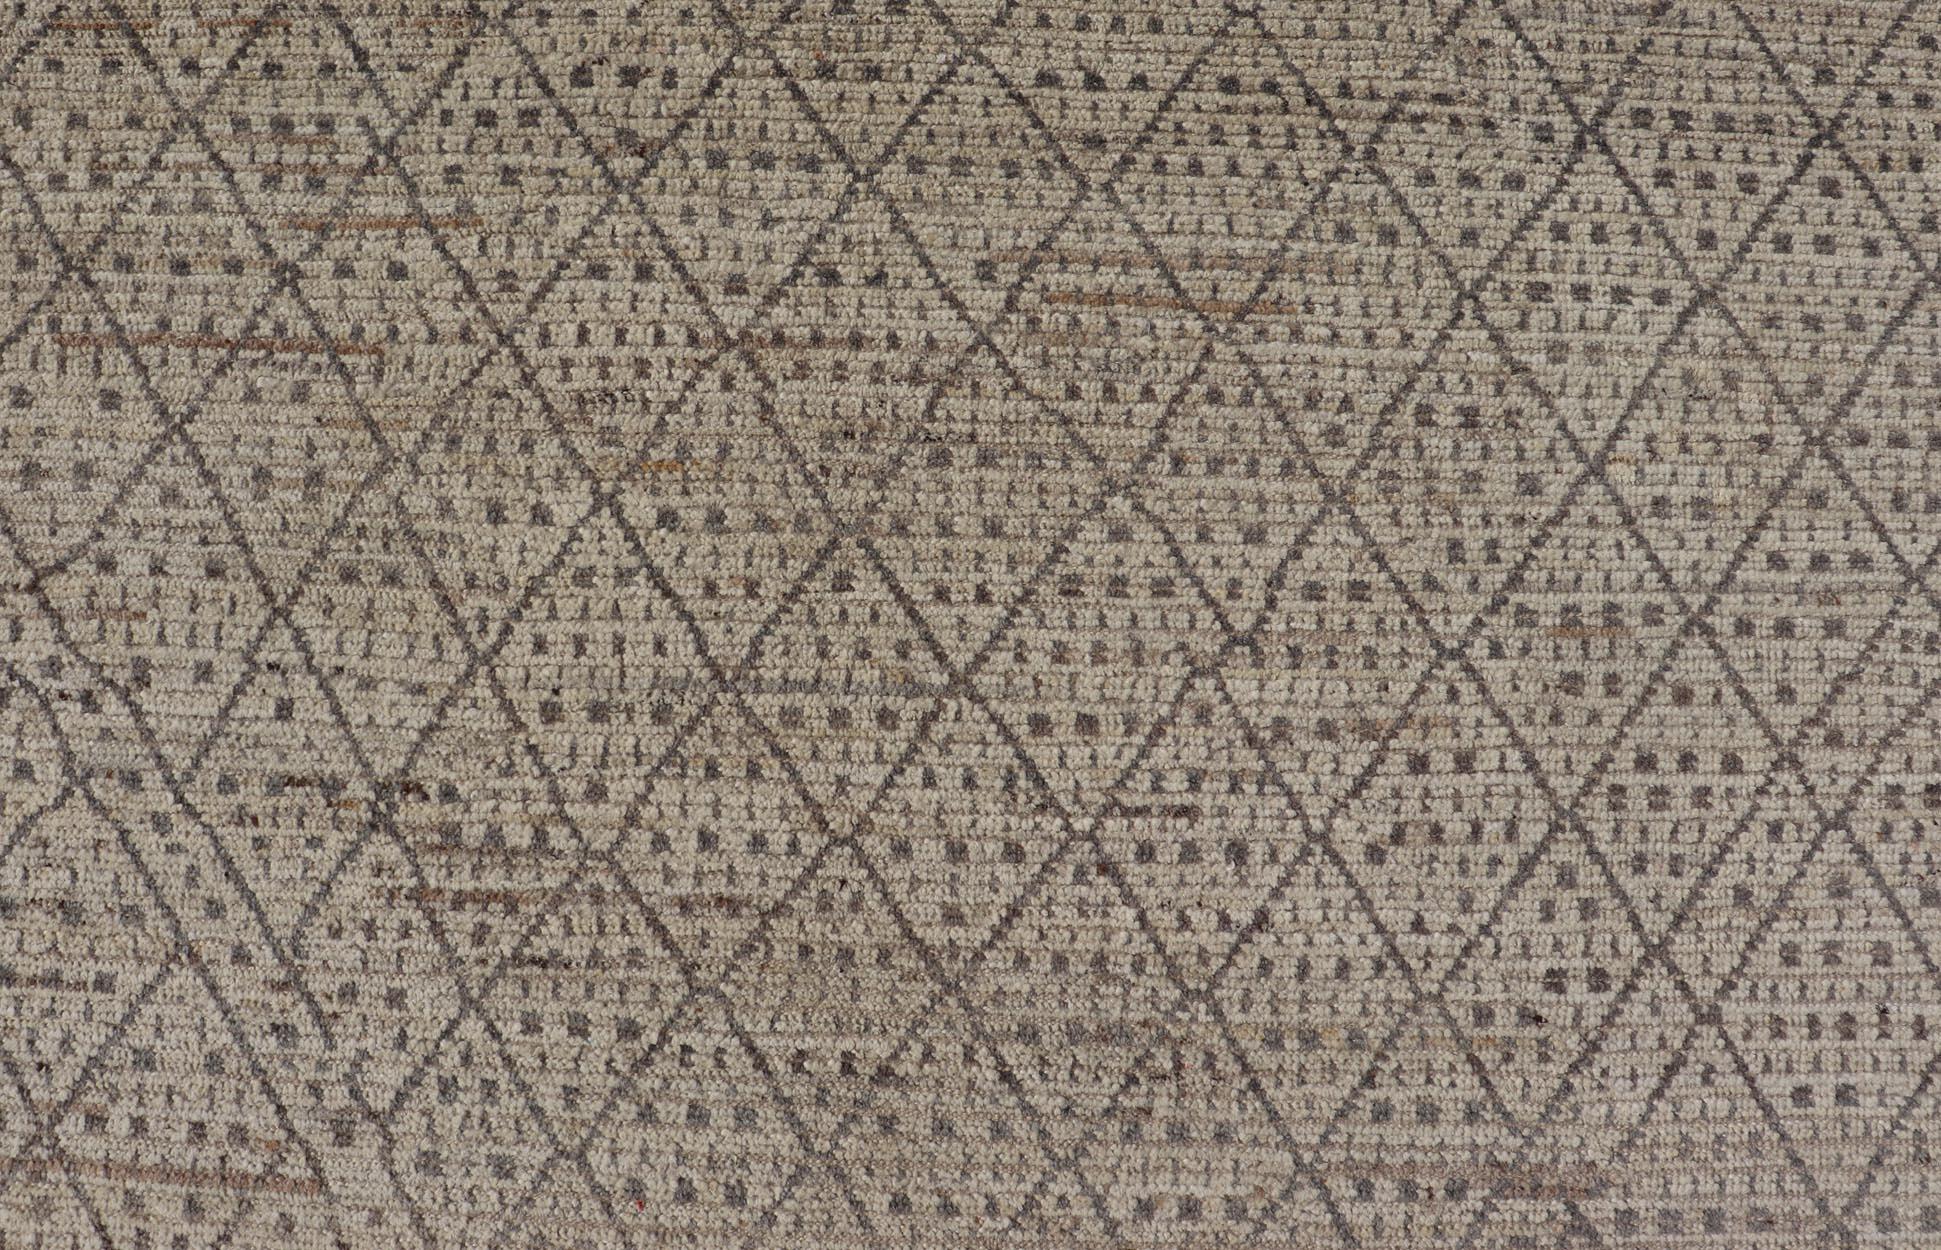 Measures: 10'5 x 13'10.
This modern casual tribal rug has been hand-knotted in wool. The rug features a modern sub-geometric diamond design, replete with various motifs within each diamond. The rug is rendered in earthy tones; making this rug a